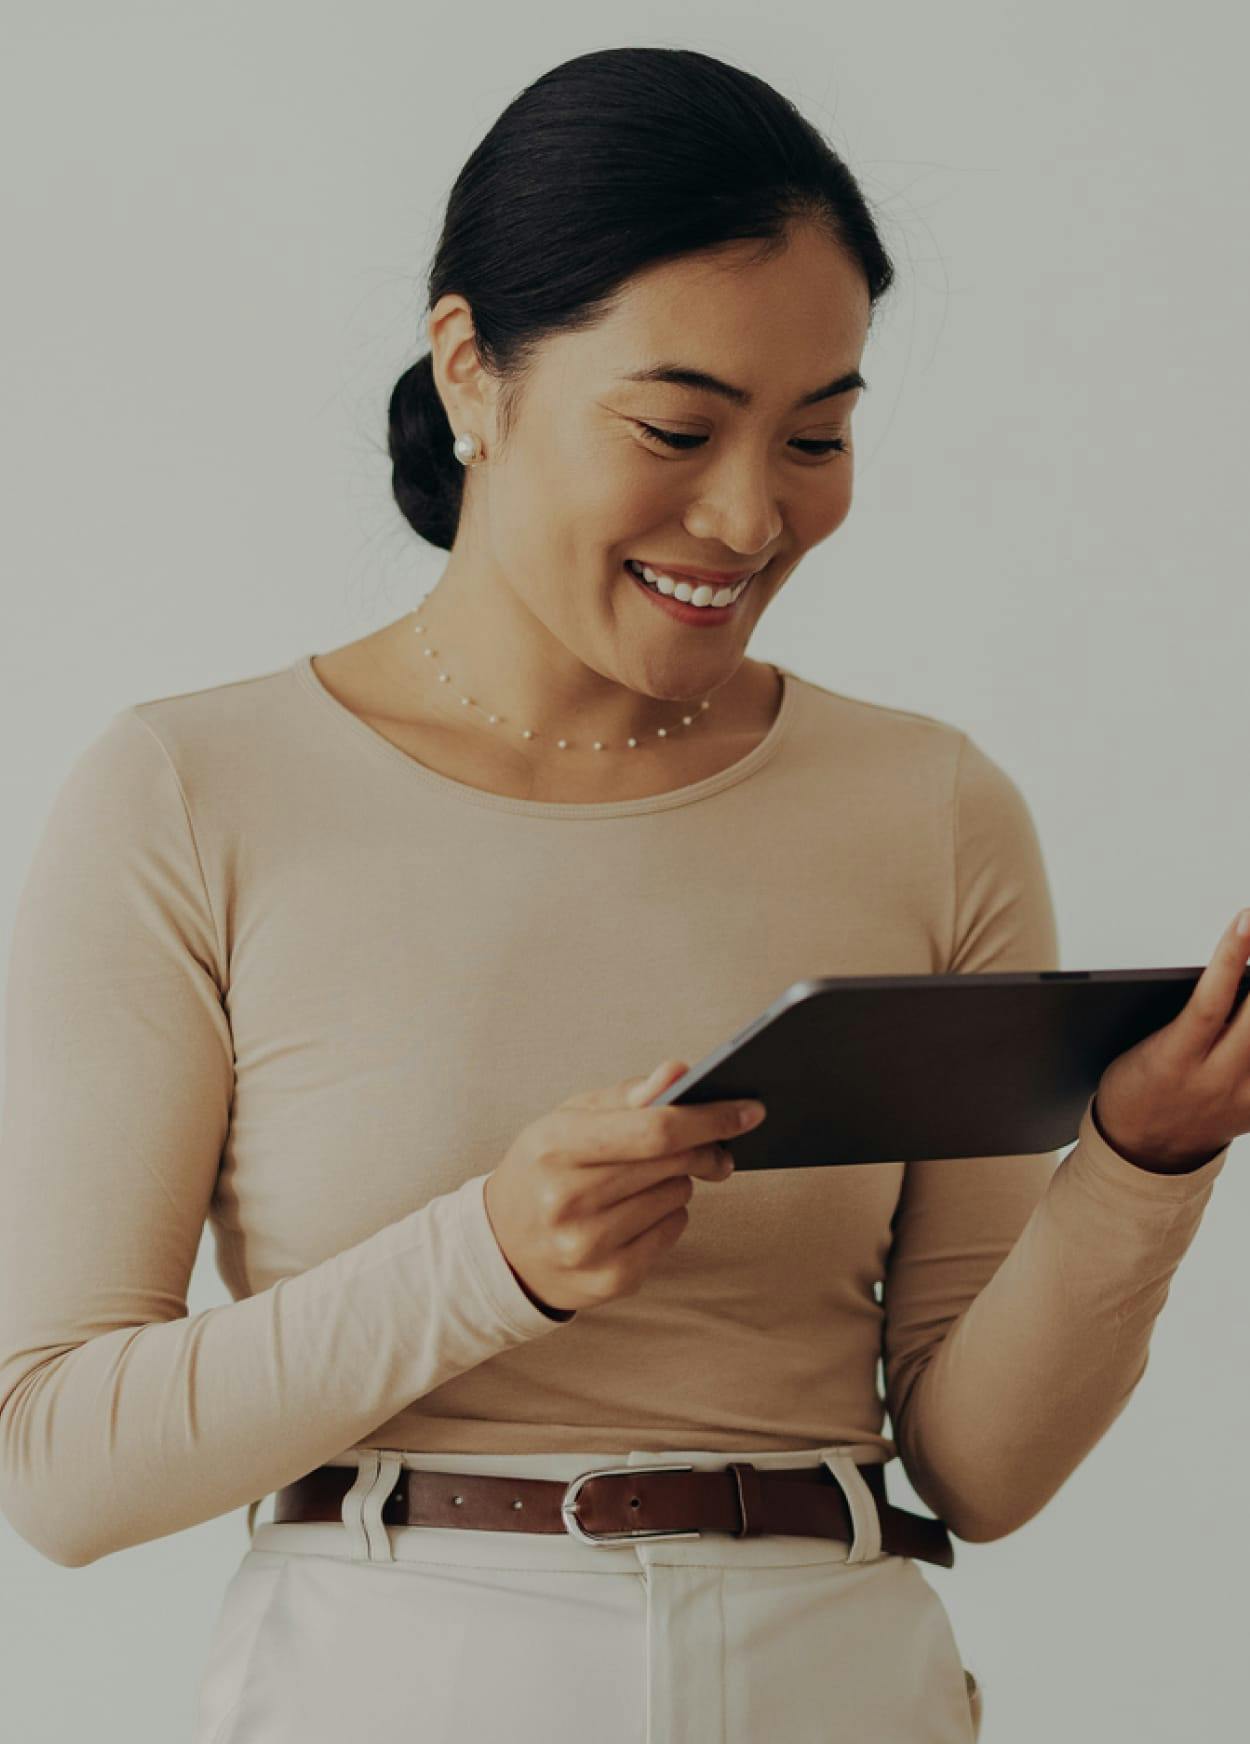 Smiling woman looking at a tablet.